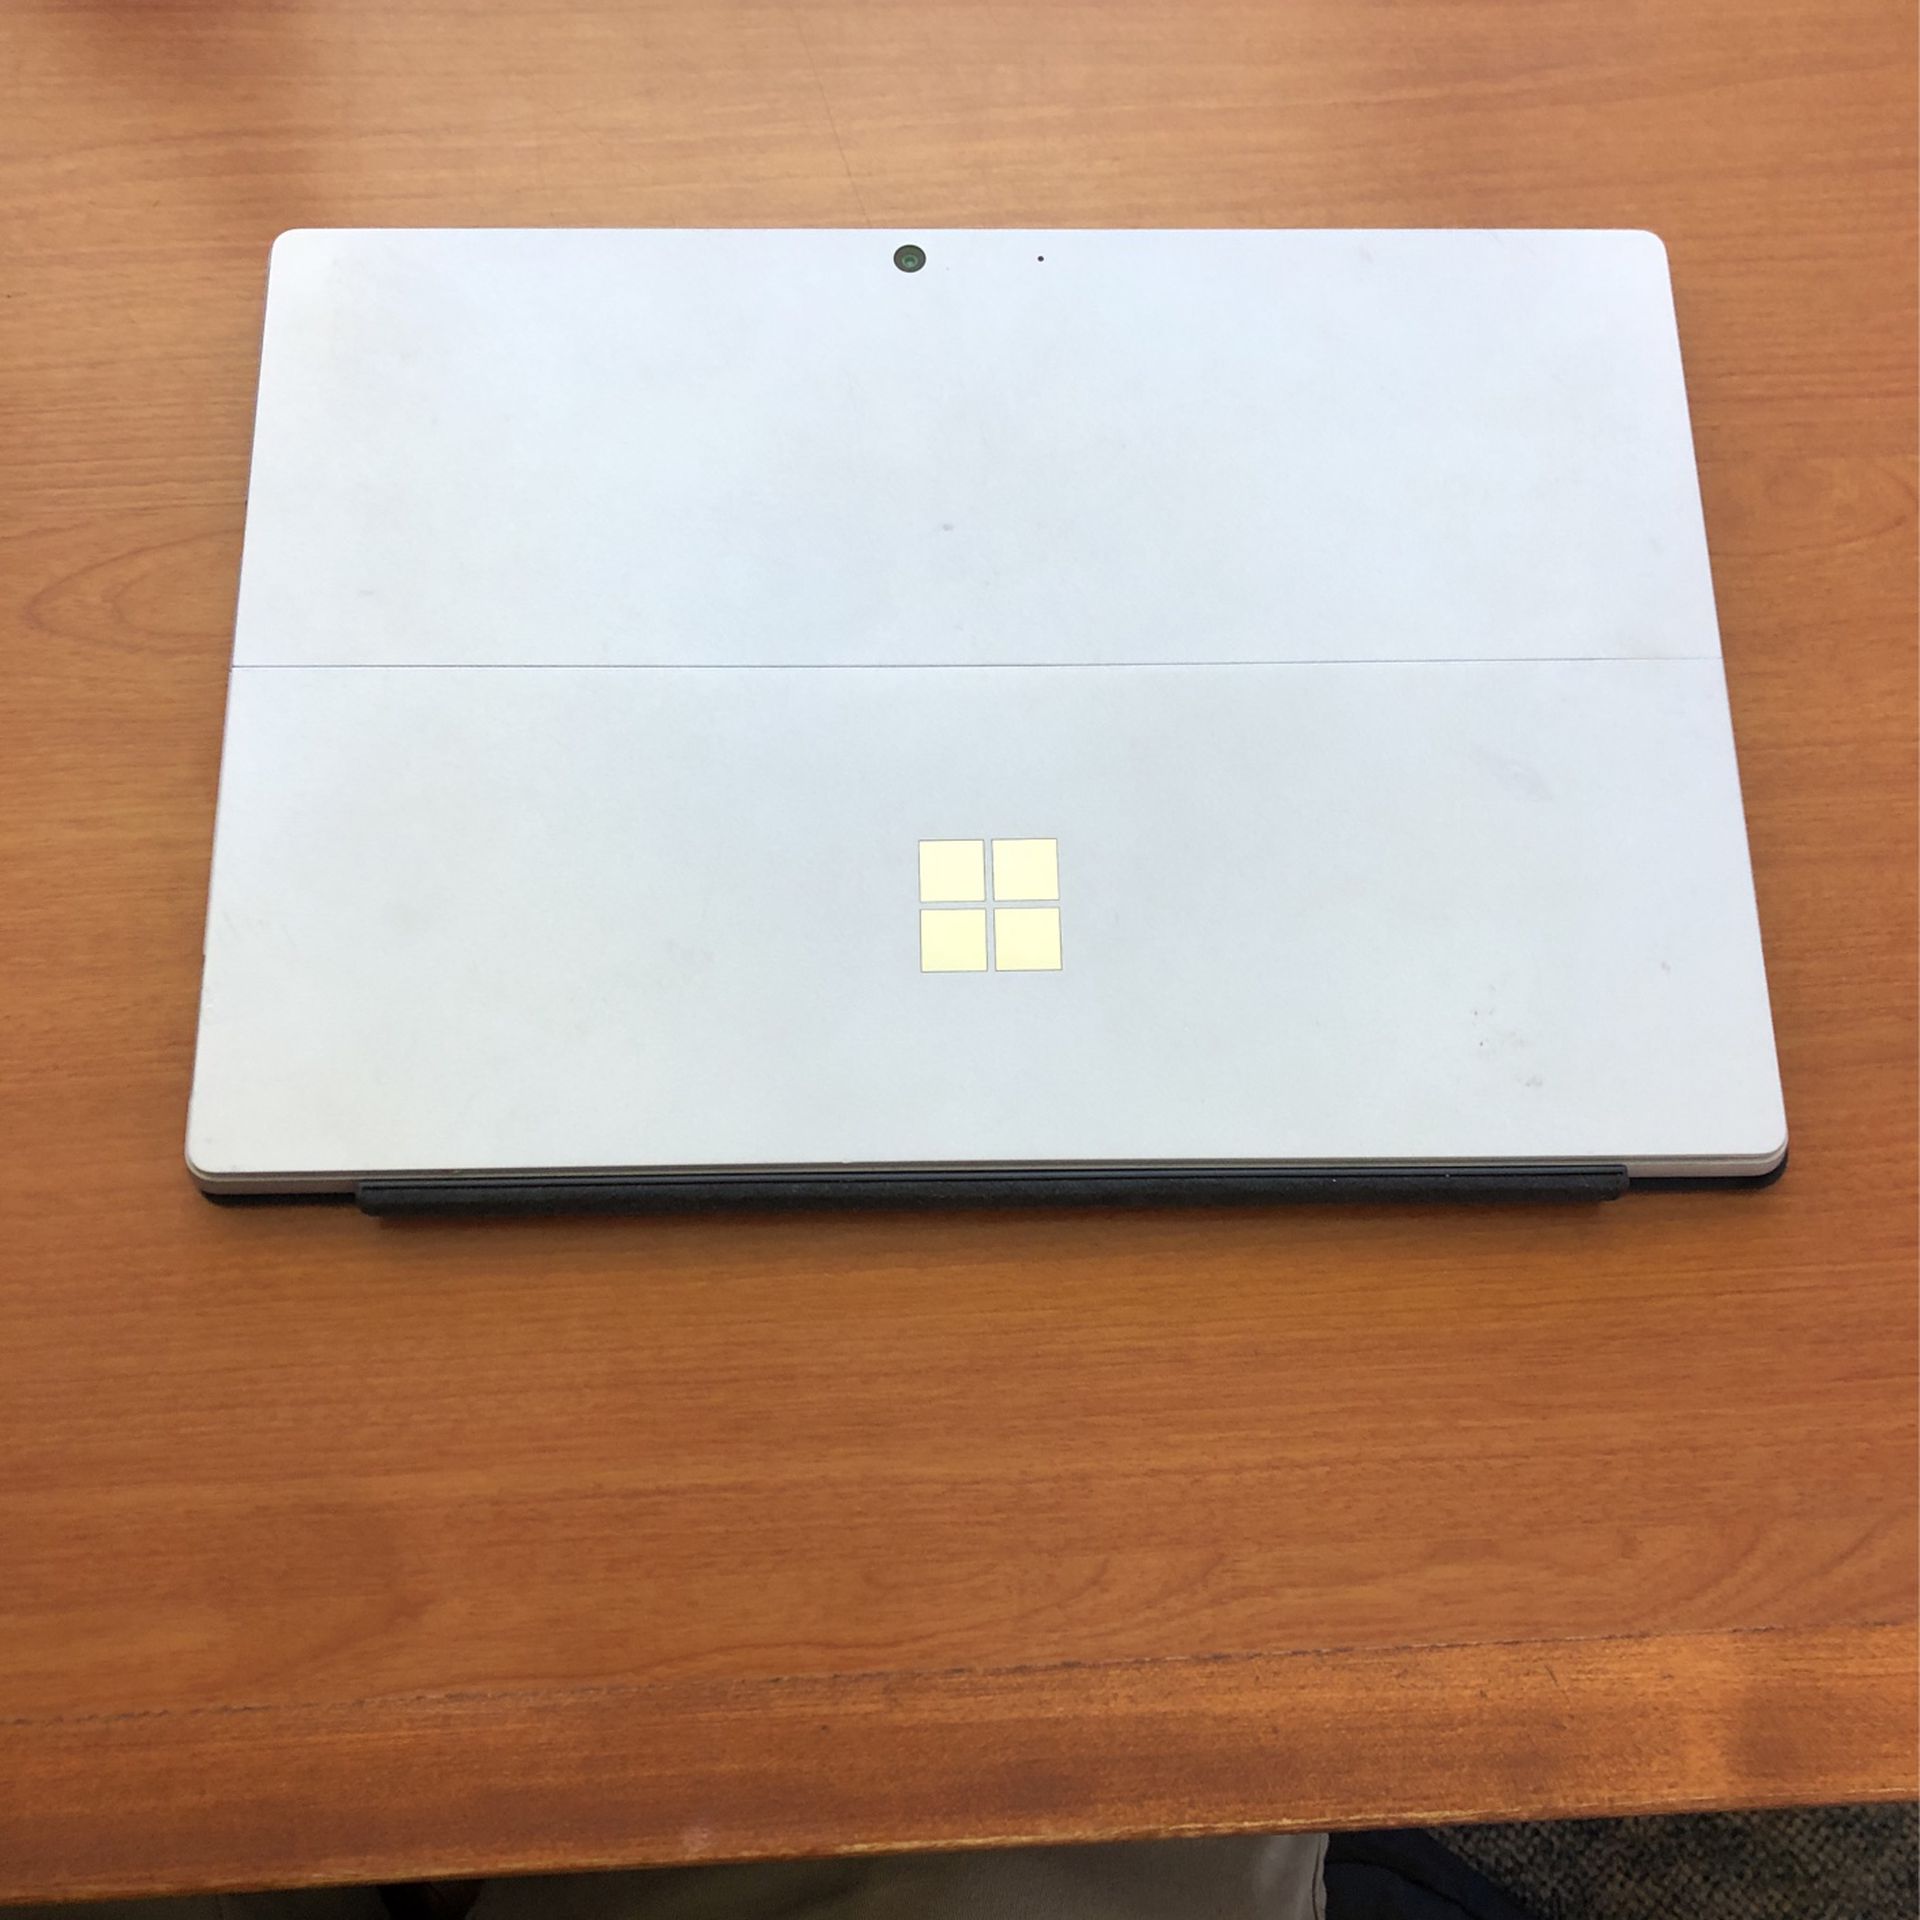 My Semi Used Laptop Is For Sale/ Windows Surface Pro 7